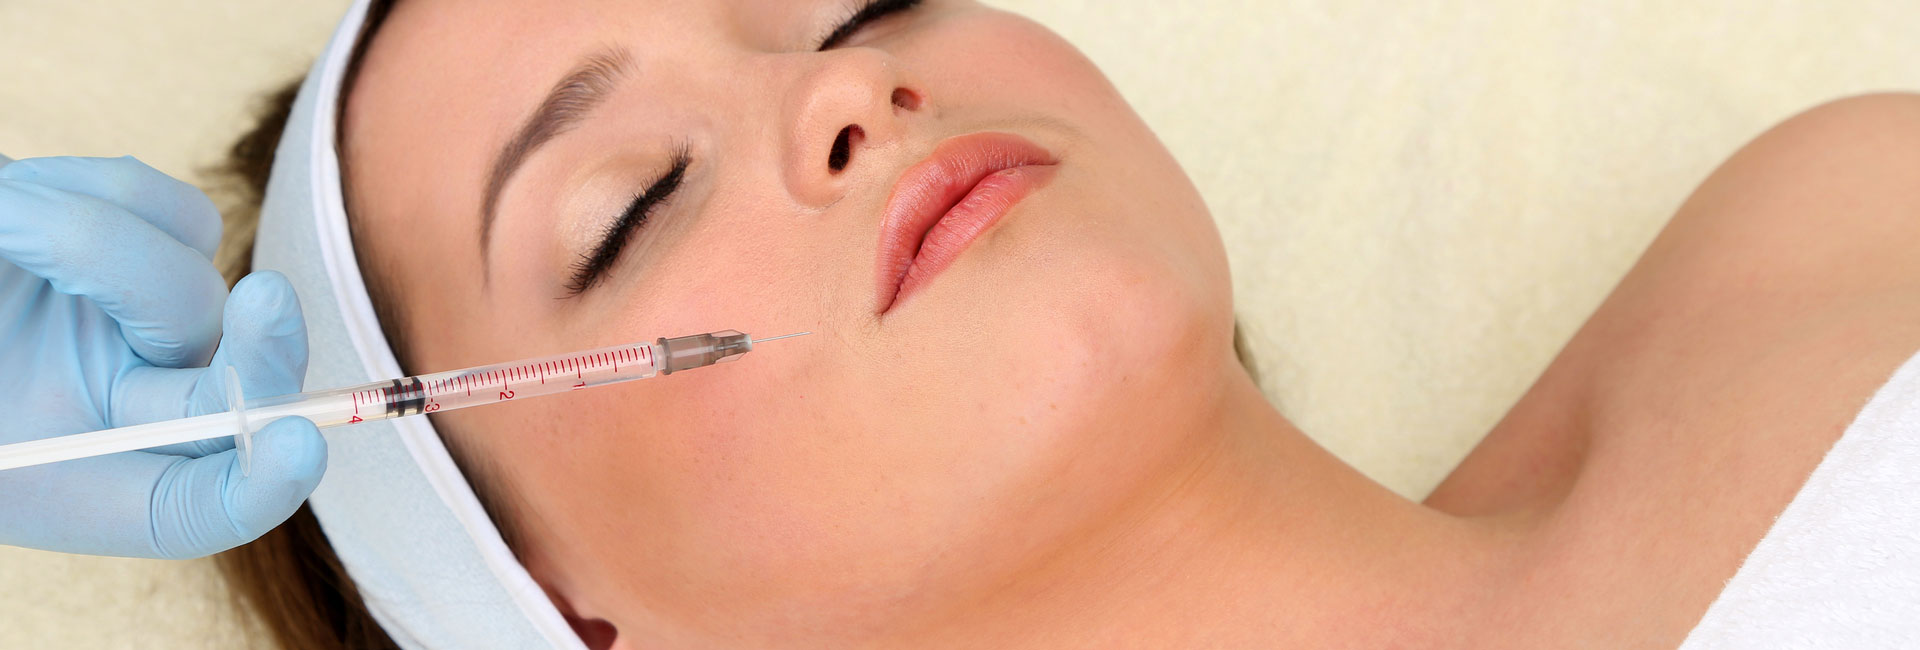 A woman getting botox injection